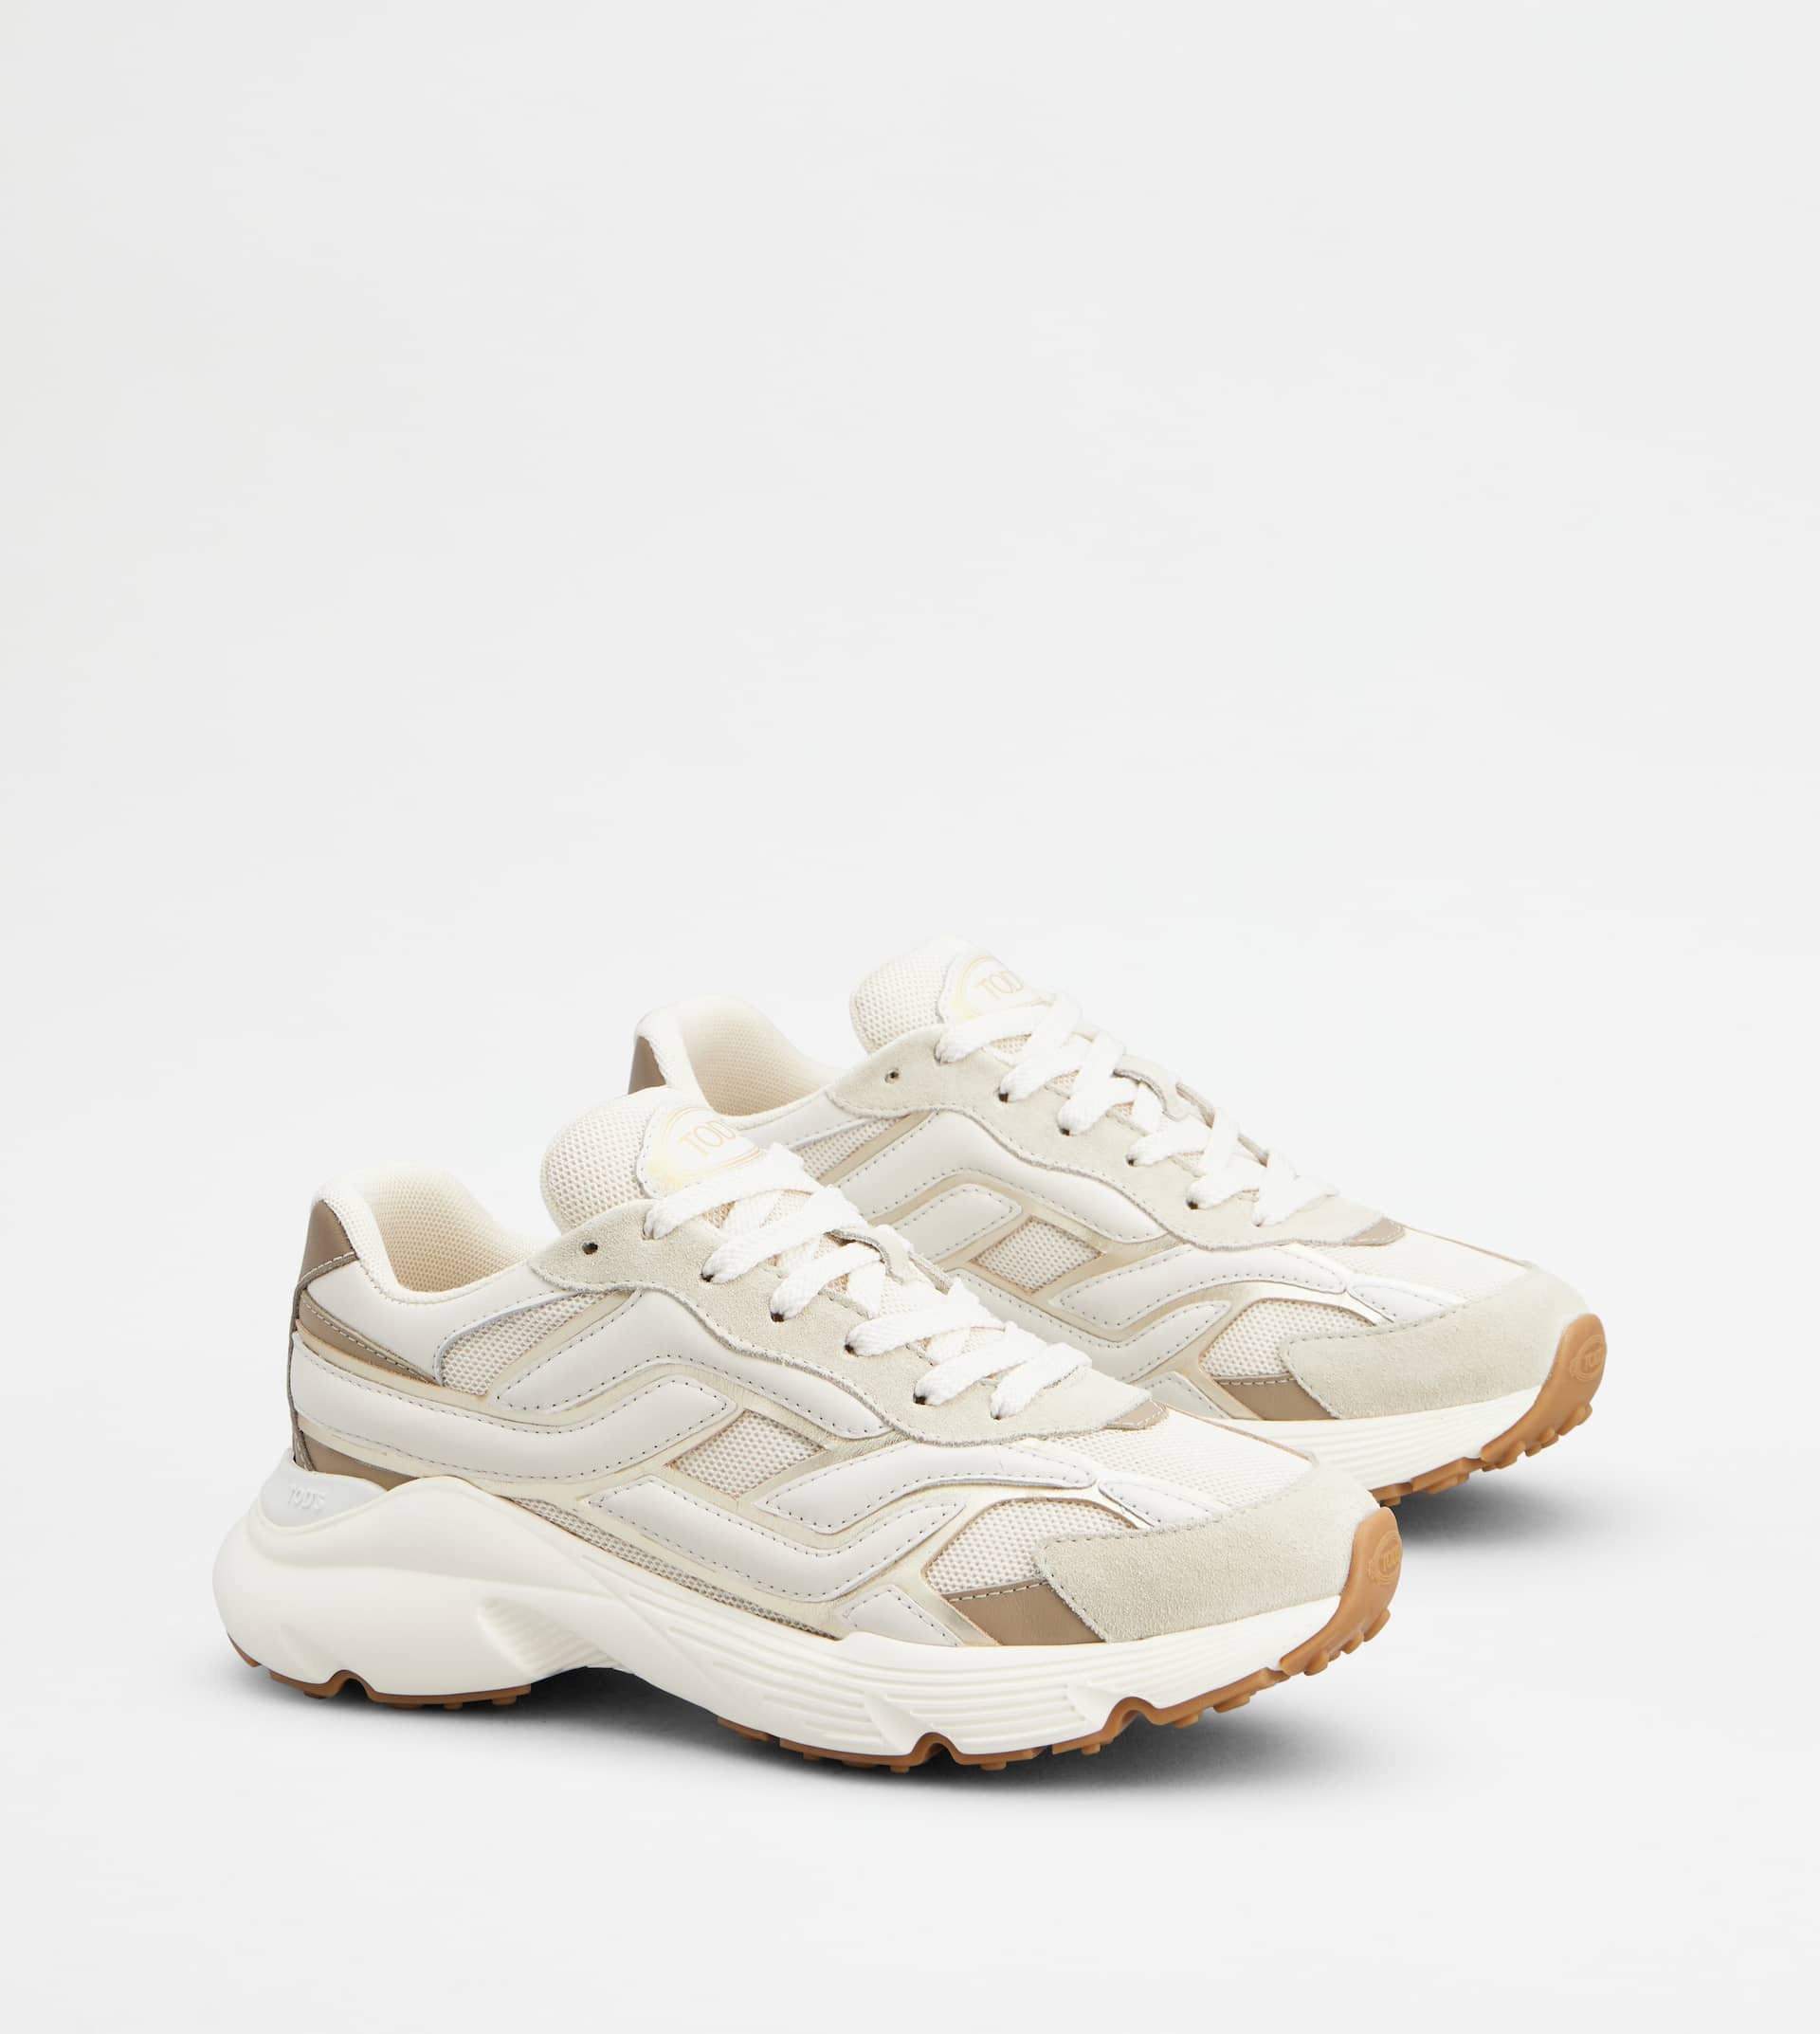 SNEAKERS IN LEATHER AND FABRIC - BEIGE, WHITE, GOLD - 3